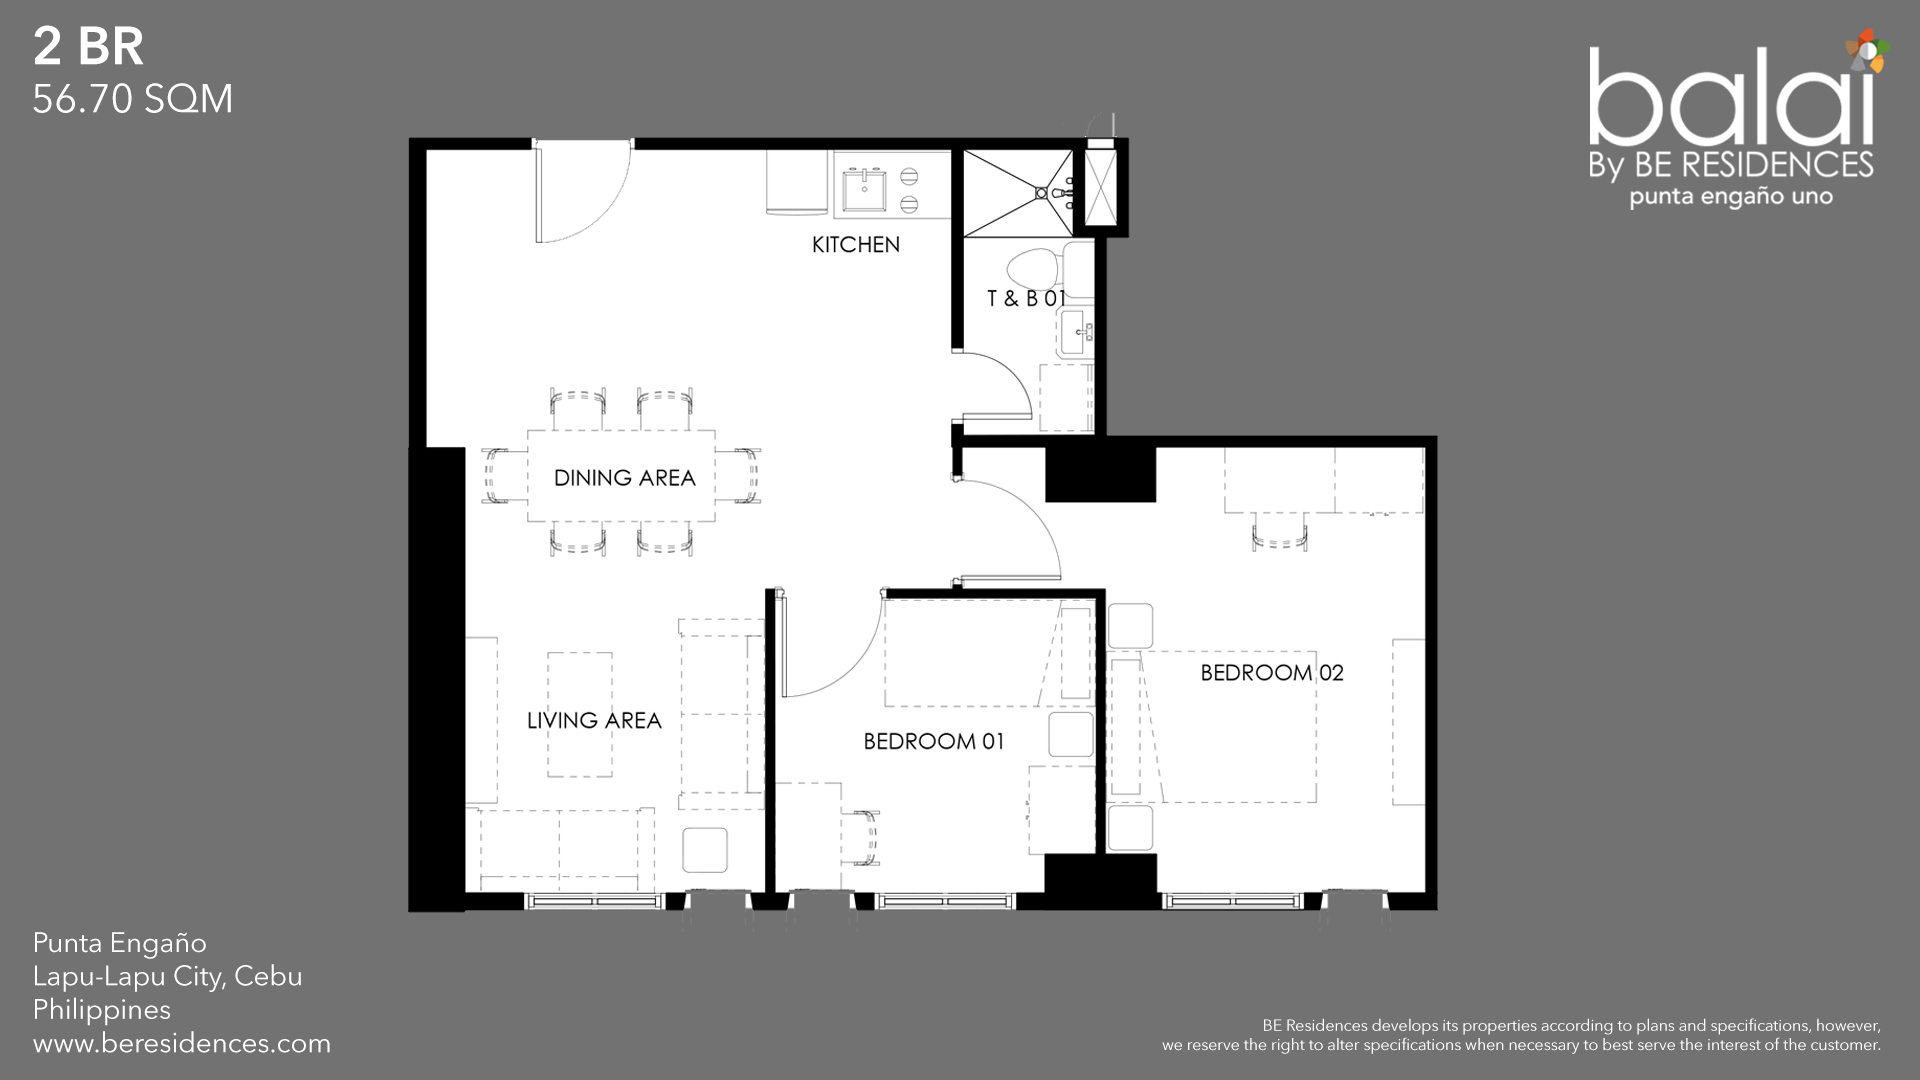 2 BR Layout